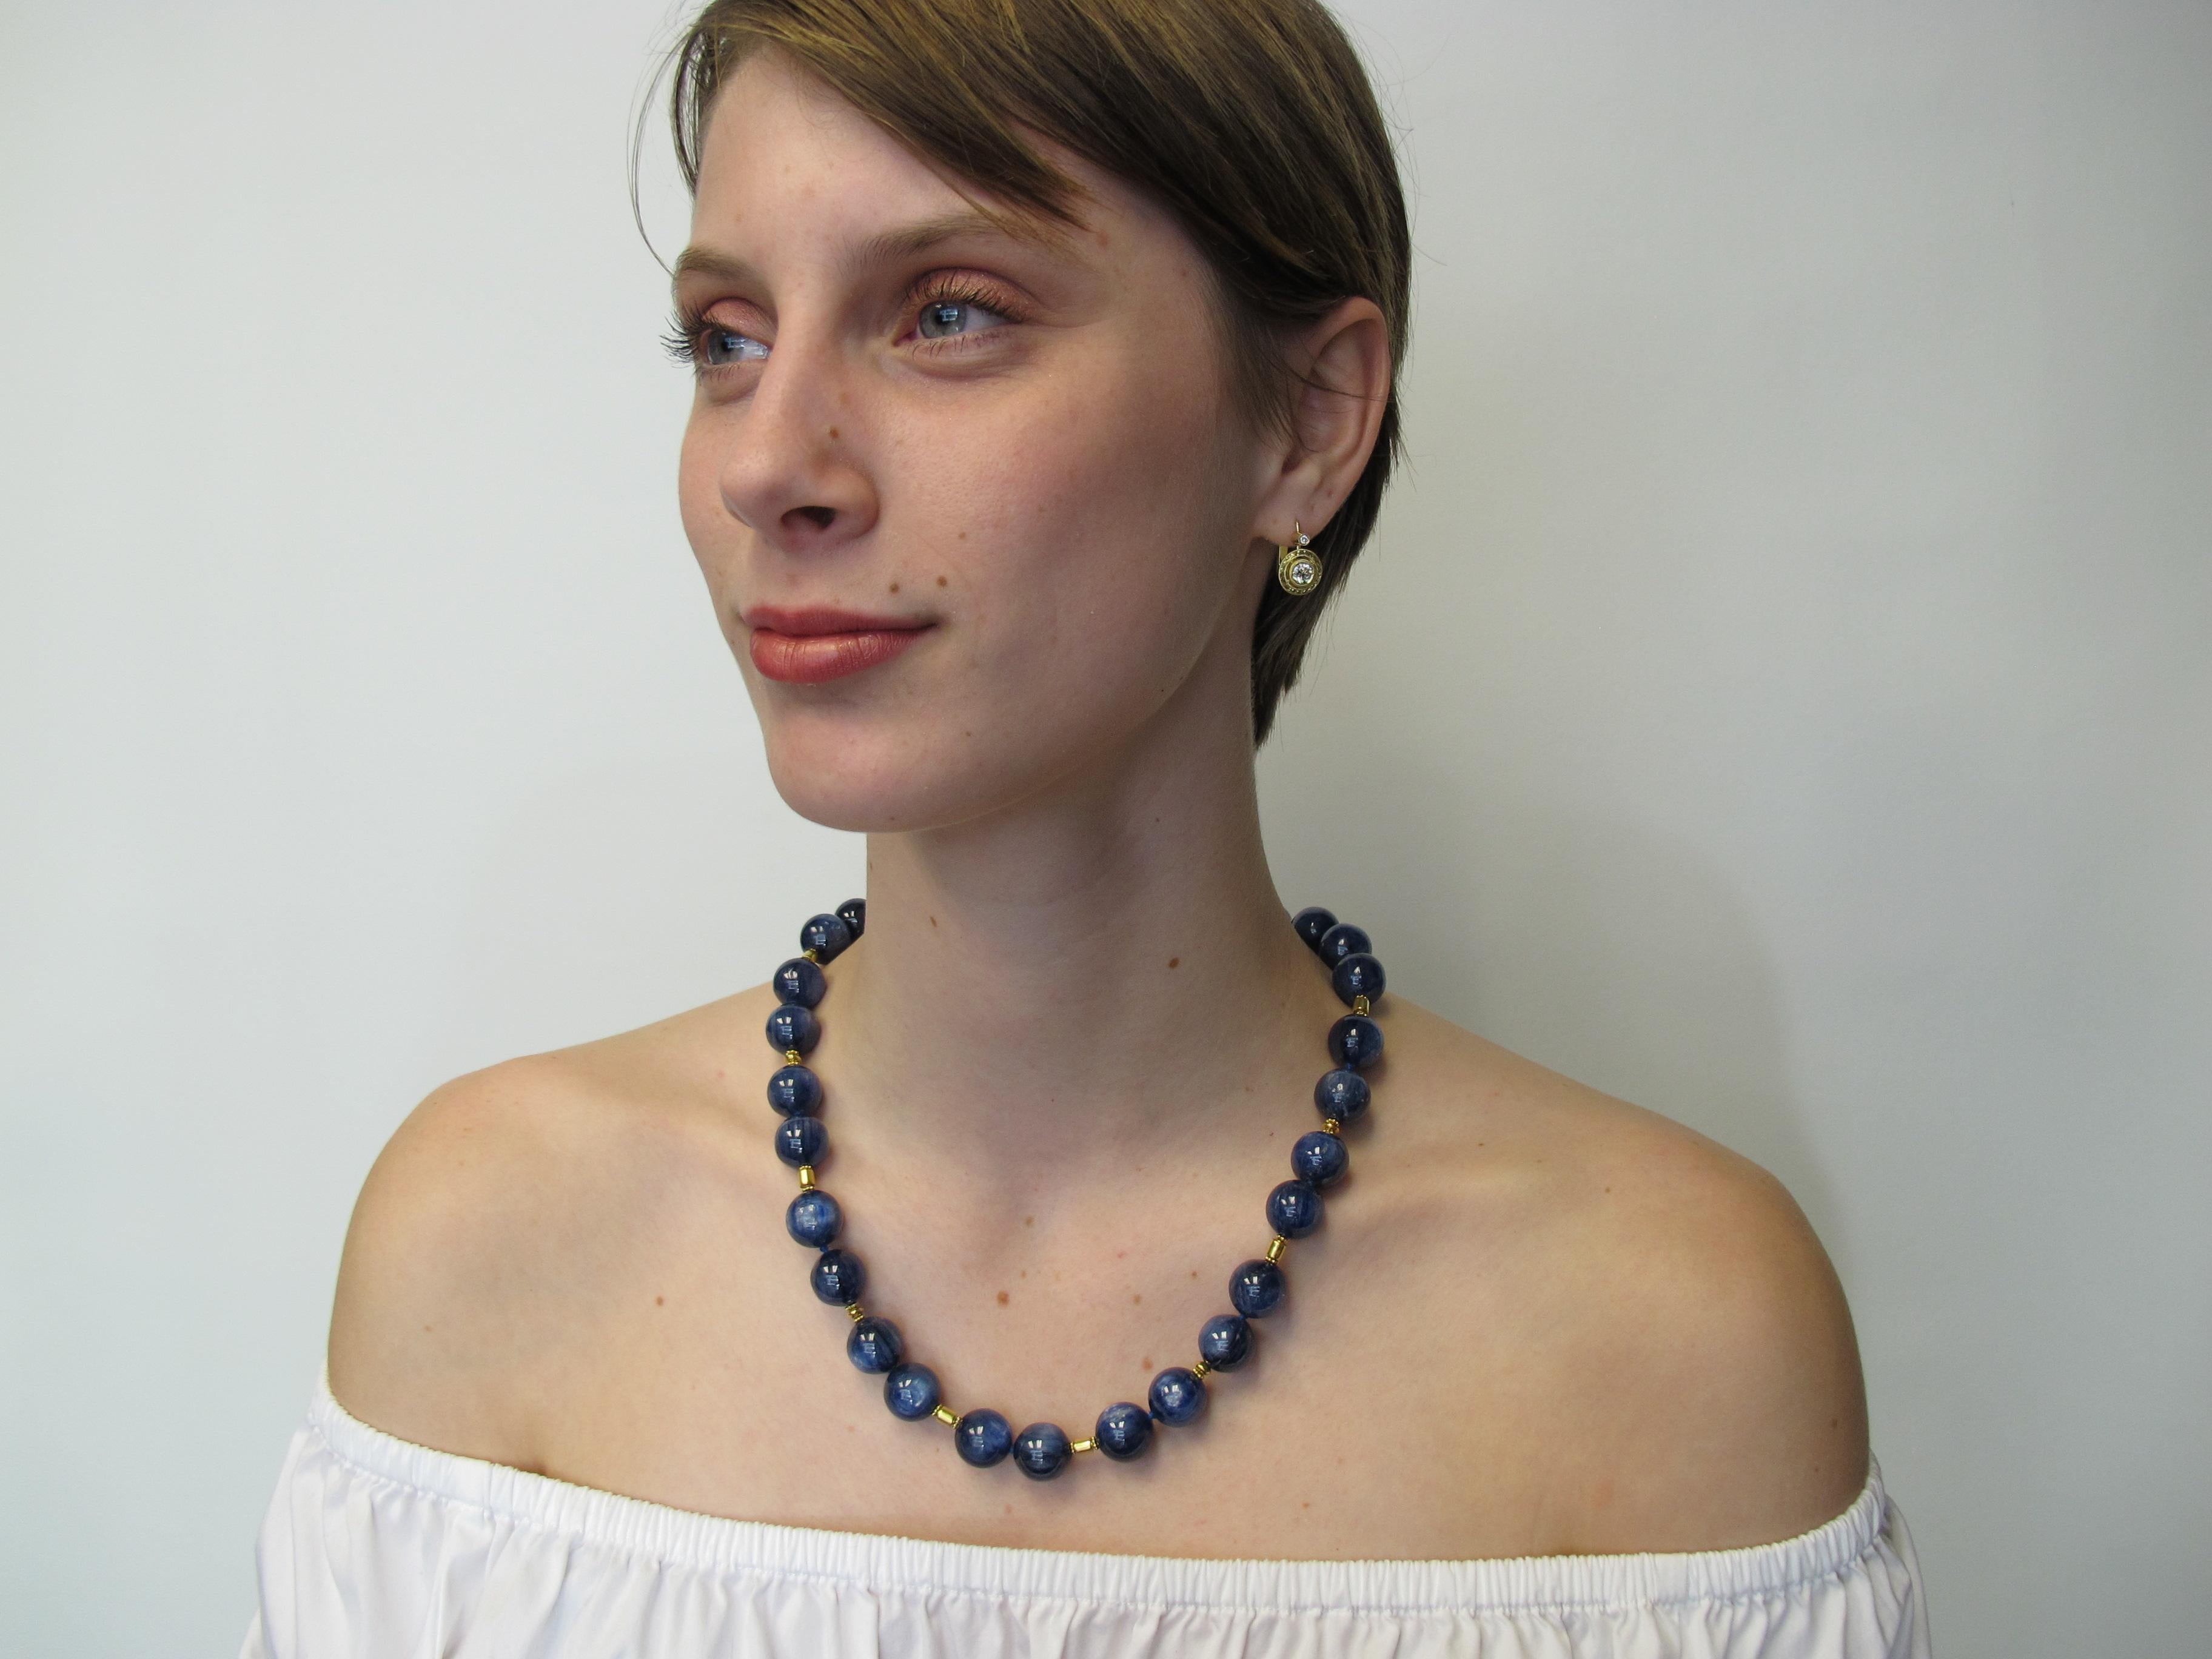 This gorgeous deep denim blue kyanite necklace is a must have!   Each kyanite bead is very large,  measuring  14mm in diameter. Kyanite of this quality and size is extremely rare. It displays a beautiful chatoyancy that makes the necklace positively